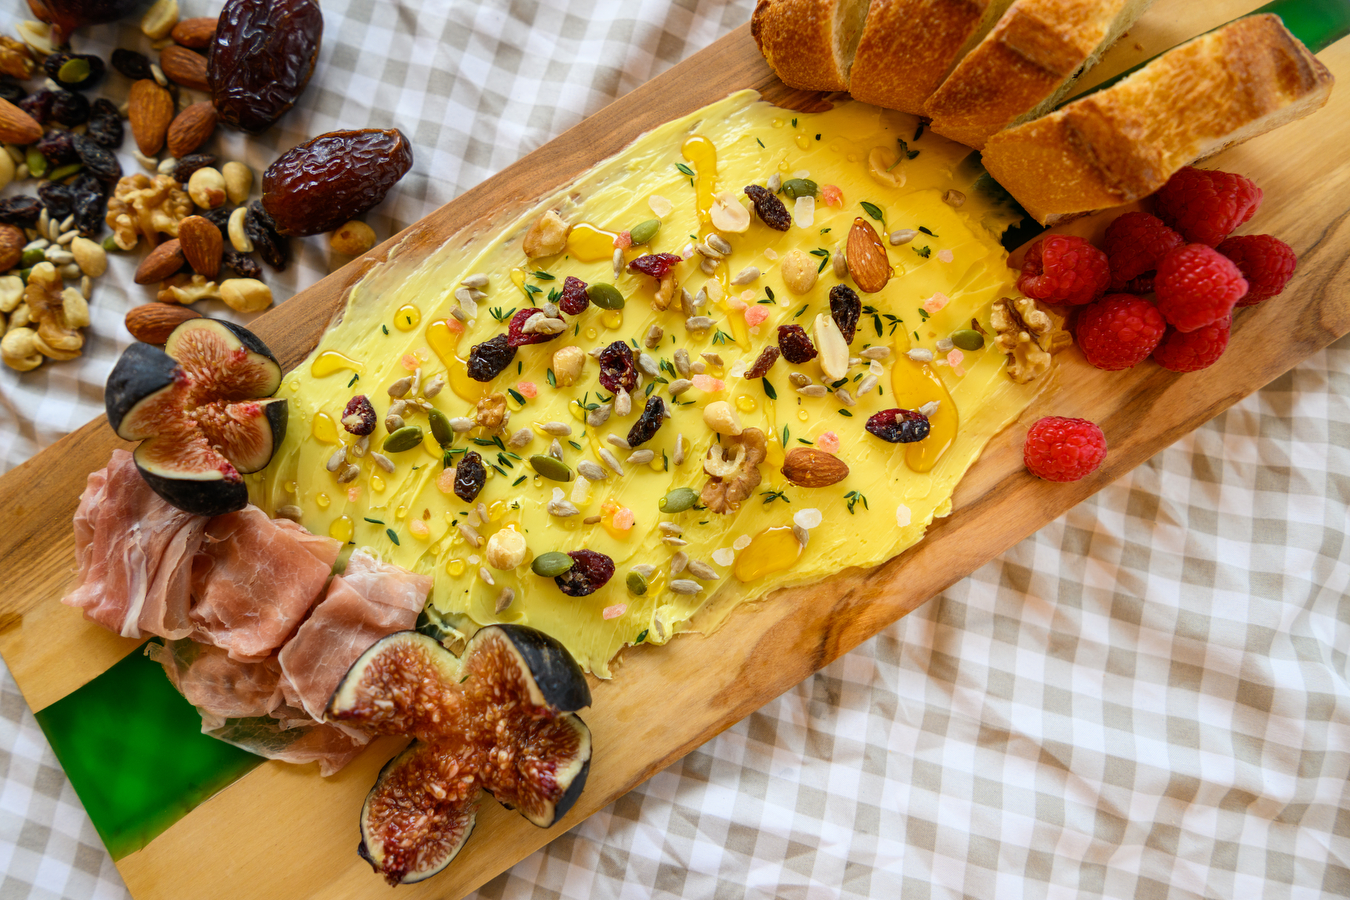 A butter board surrounded by bread, figs, dates, nuts, raspberries, and other snacks